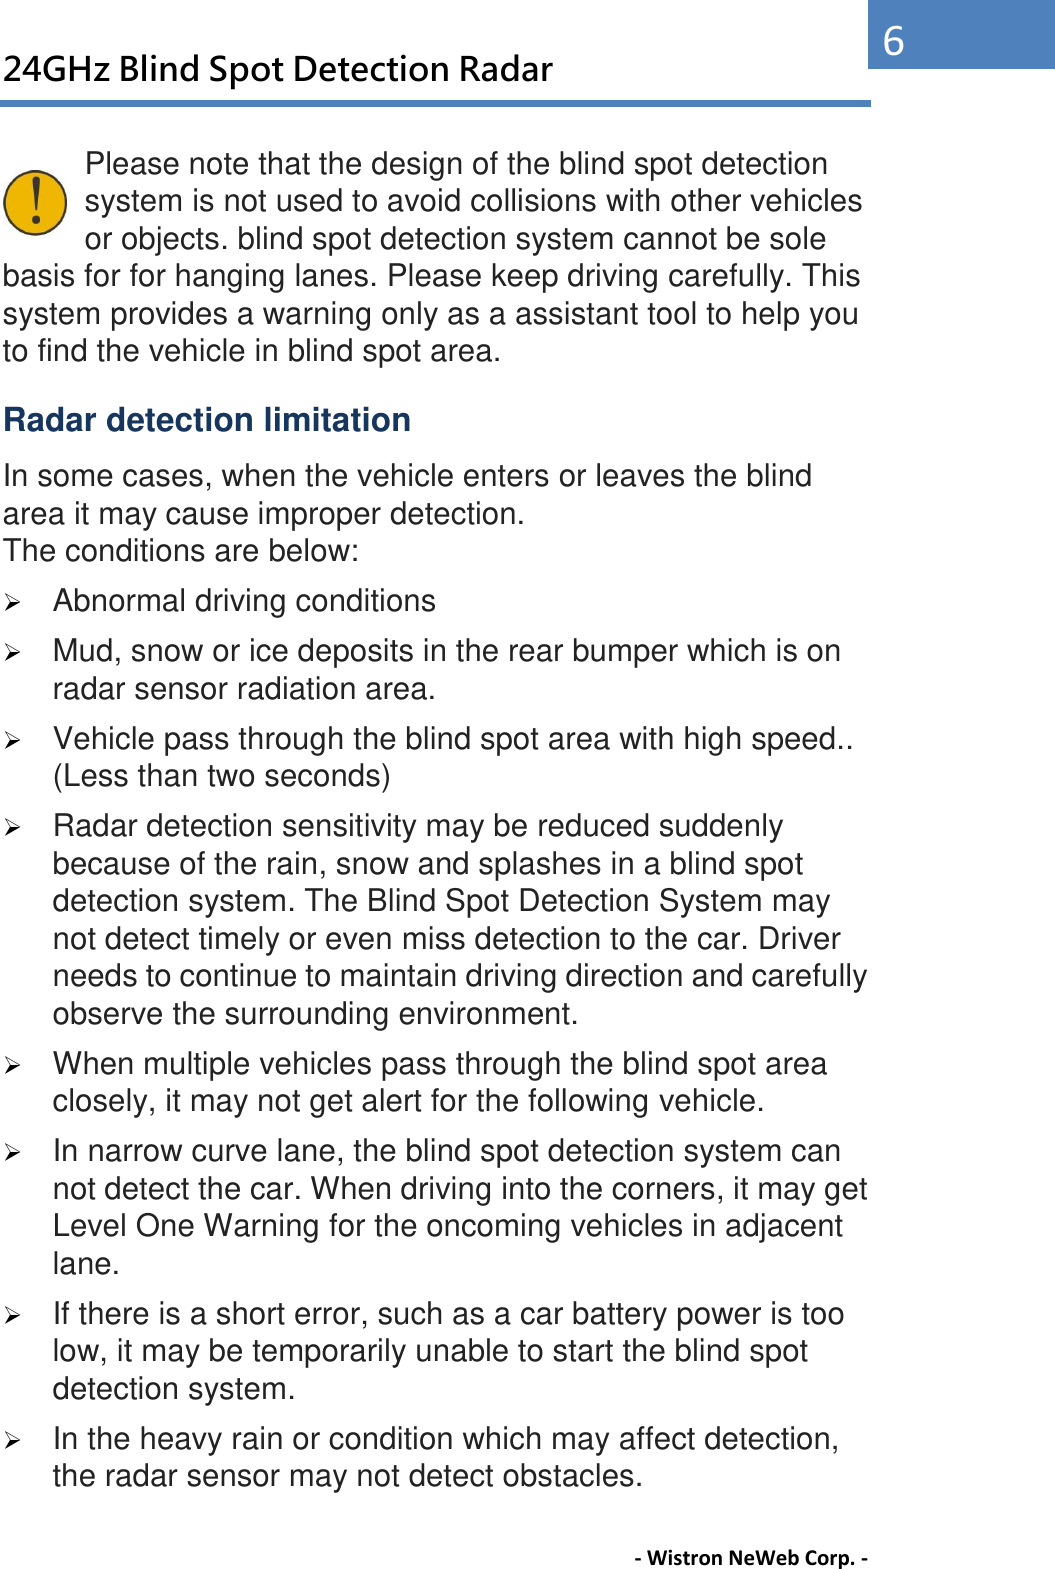 24GHz Blind Spot Detection Radar - Wistron NeWeb Corp. - 6 Please note that the design of the blind spot detection system is not used to avoid collisions with other vehicles or objects. blind spot detection system cannot be sole basis for for hanging lanes. Please keep driving carefully. This system provides a warning only as a assistant tool to help you to find the vehicle in blind spot area. Radar detection limitation In some cases, when the vehicle enters or leaves the blind area it may cause improper detection.   The conditions are below:    Abnormal driving conditions    Mud, snow or ice deposits in the rear bumper which is on radar sensor radiation area.  Vehicle pass through the blind spot area with high speed.. (Less than two seconds)    Radar detection sensitivity may be reduced suddenly because of the rain, snow and splashes in a blind spot detection system. The Blind Spot Detection System may not detect timely or even miss detection to the car. Driver needs to continue to maintain driving direction and carefully observe the surrounding environment.    When multiple vehicles pass through the blind spot area closely, it may not get alert for the following vehicle.    In narrow curve lane, the blind spot detection system can not detect the car. When driving into the corners, it may get Level One Warning for the oncoming vehicles in adjacent lane.    If there is a short error, such as a car battery power is too low, it may be temporarily unable to start the blind spot detection system.    In the heavy rain or condition which may affect detection, the radar sensor may not detect obstacles. 